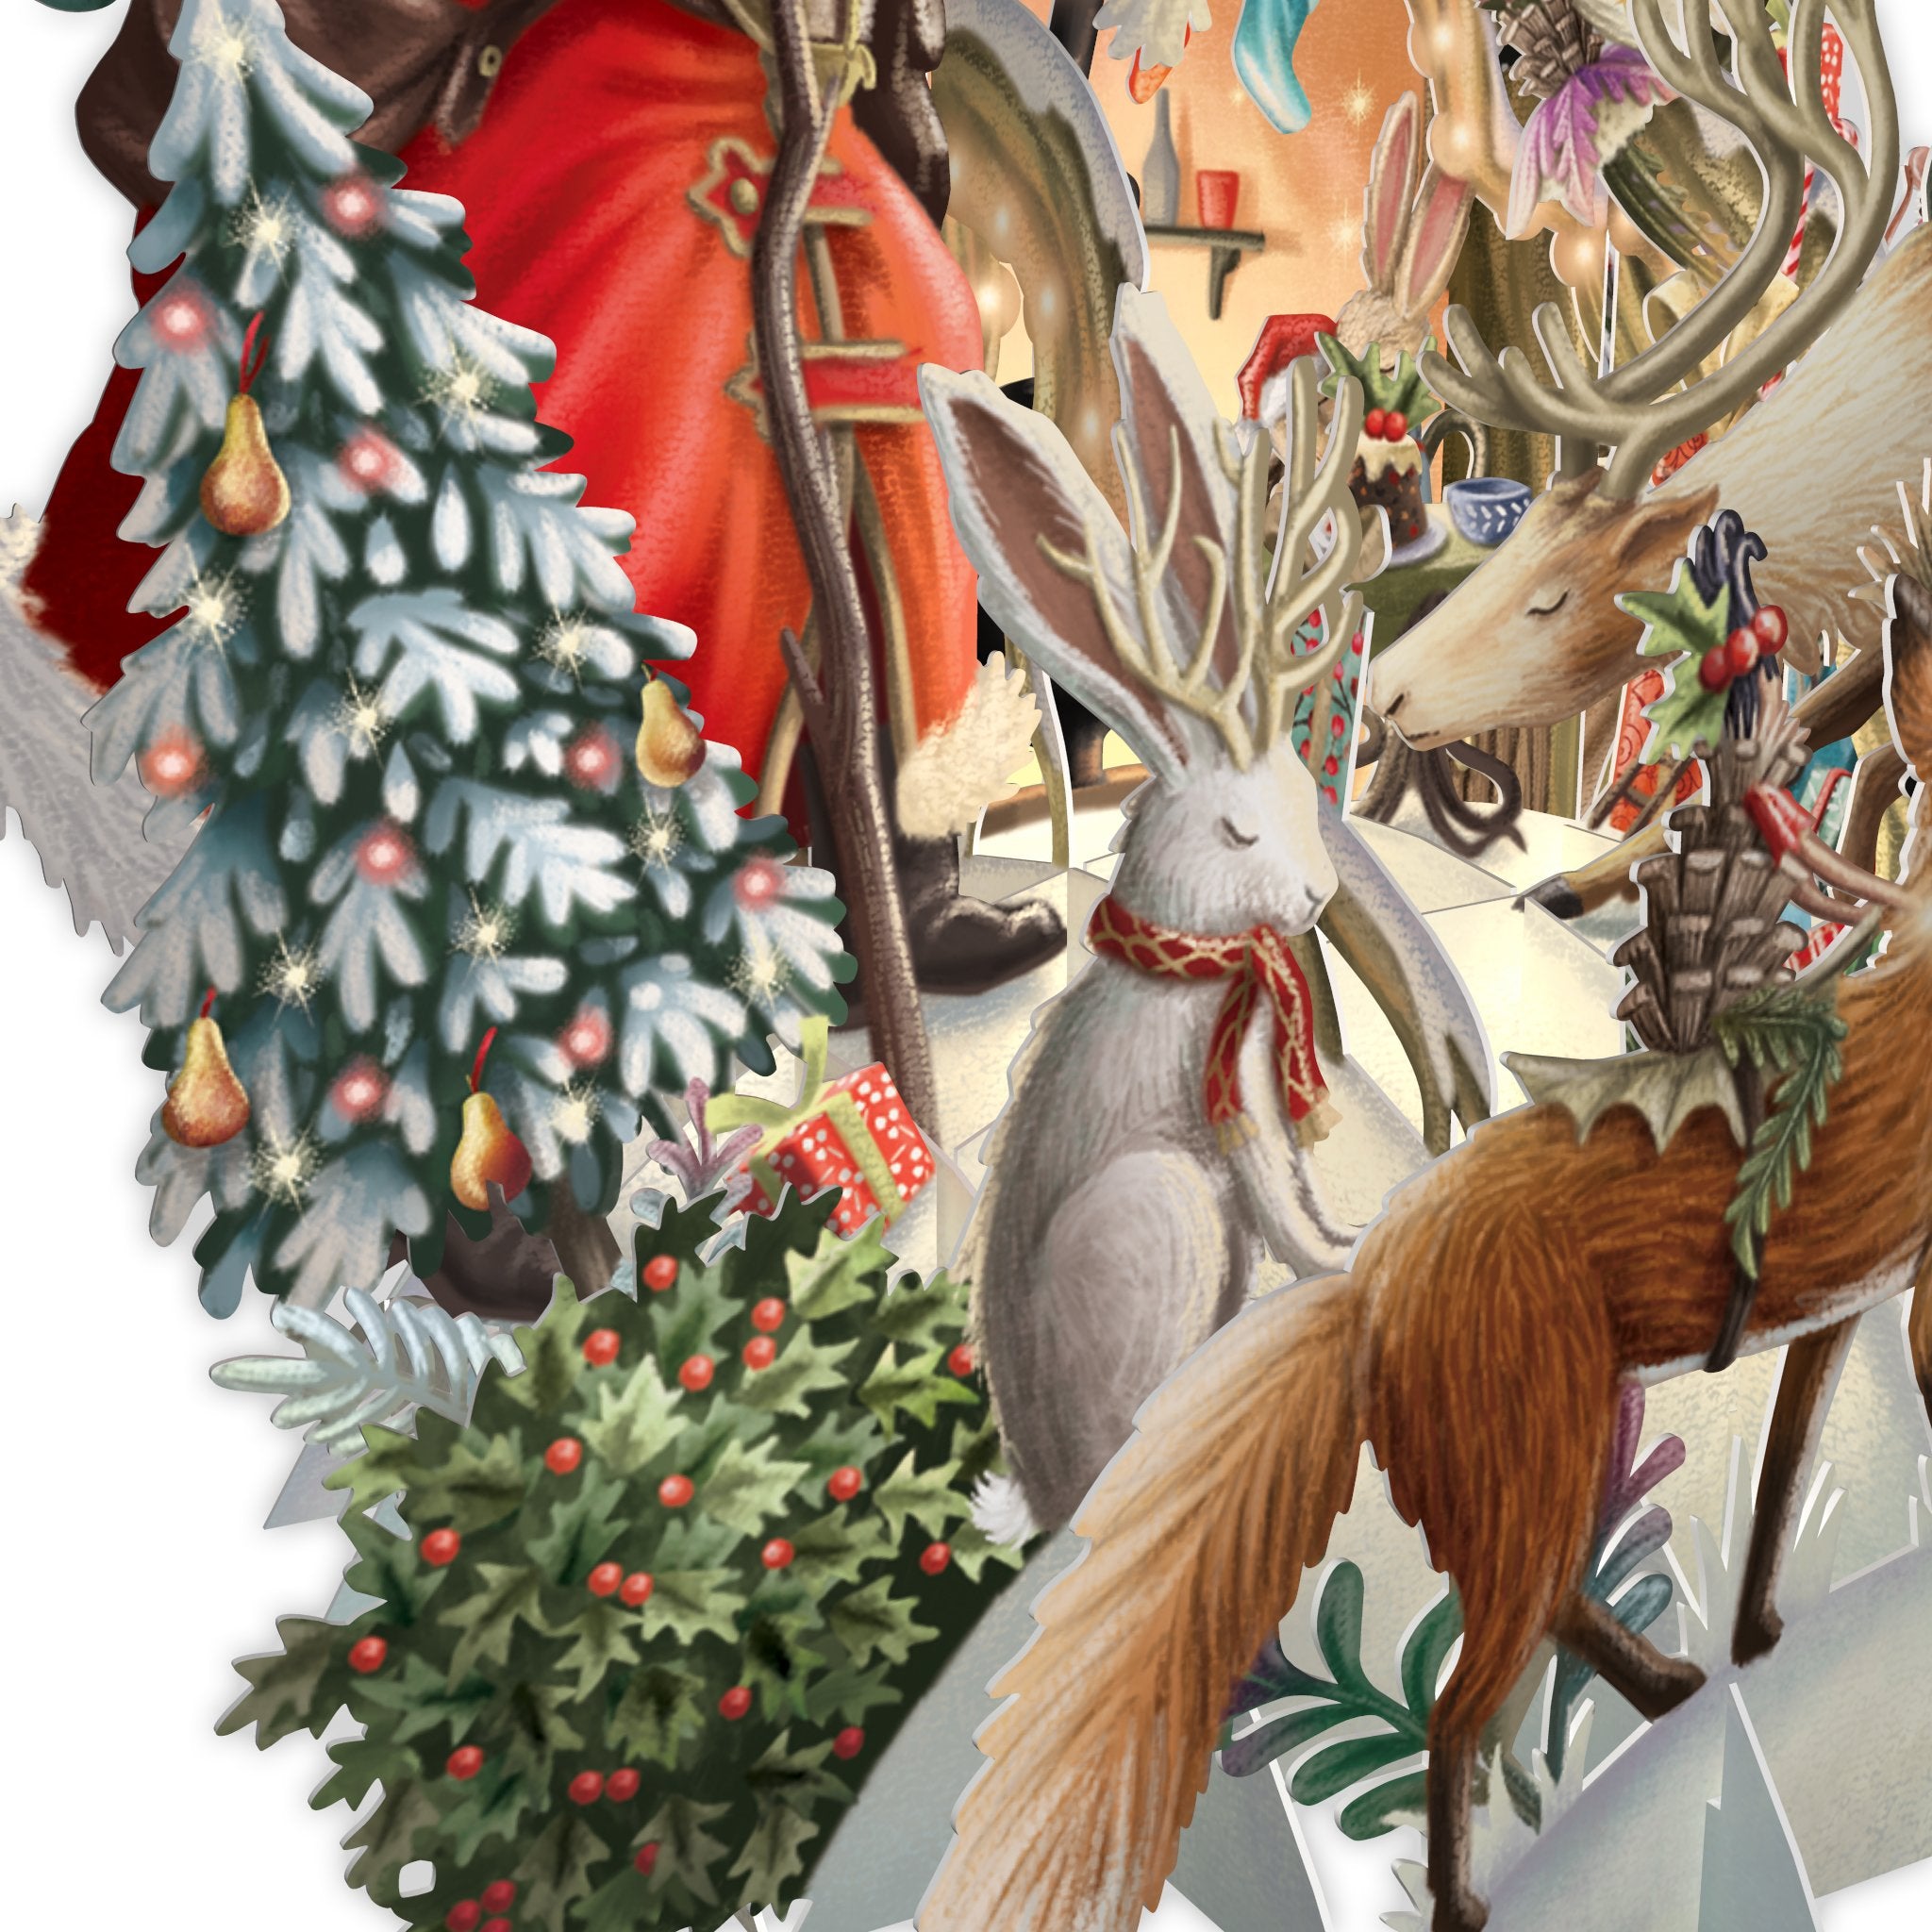 &quot;Santa&#39;s Woodland&quot; - Top of the World Christmas Card